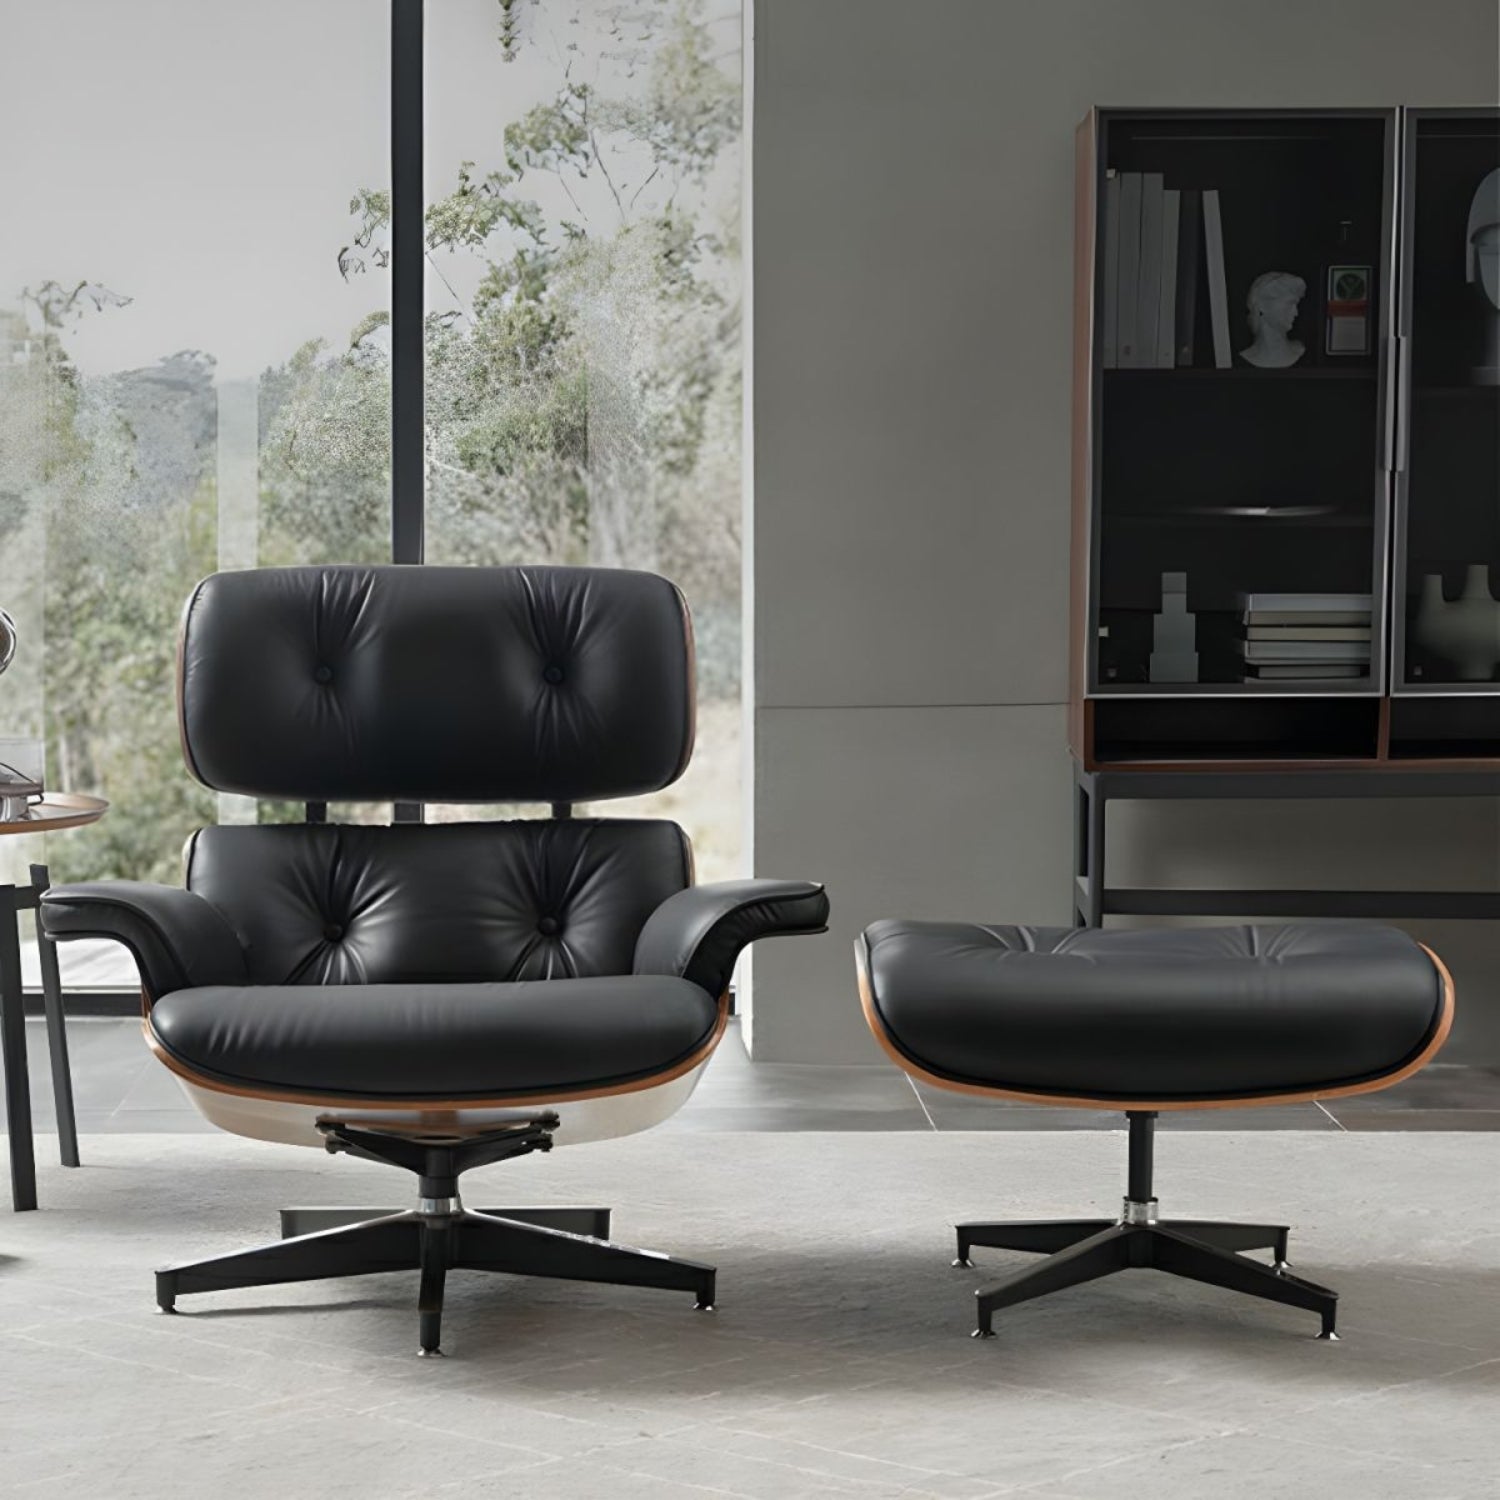 Eames lounge chair and ottoman - iconic mid-century modern furniture design.